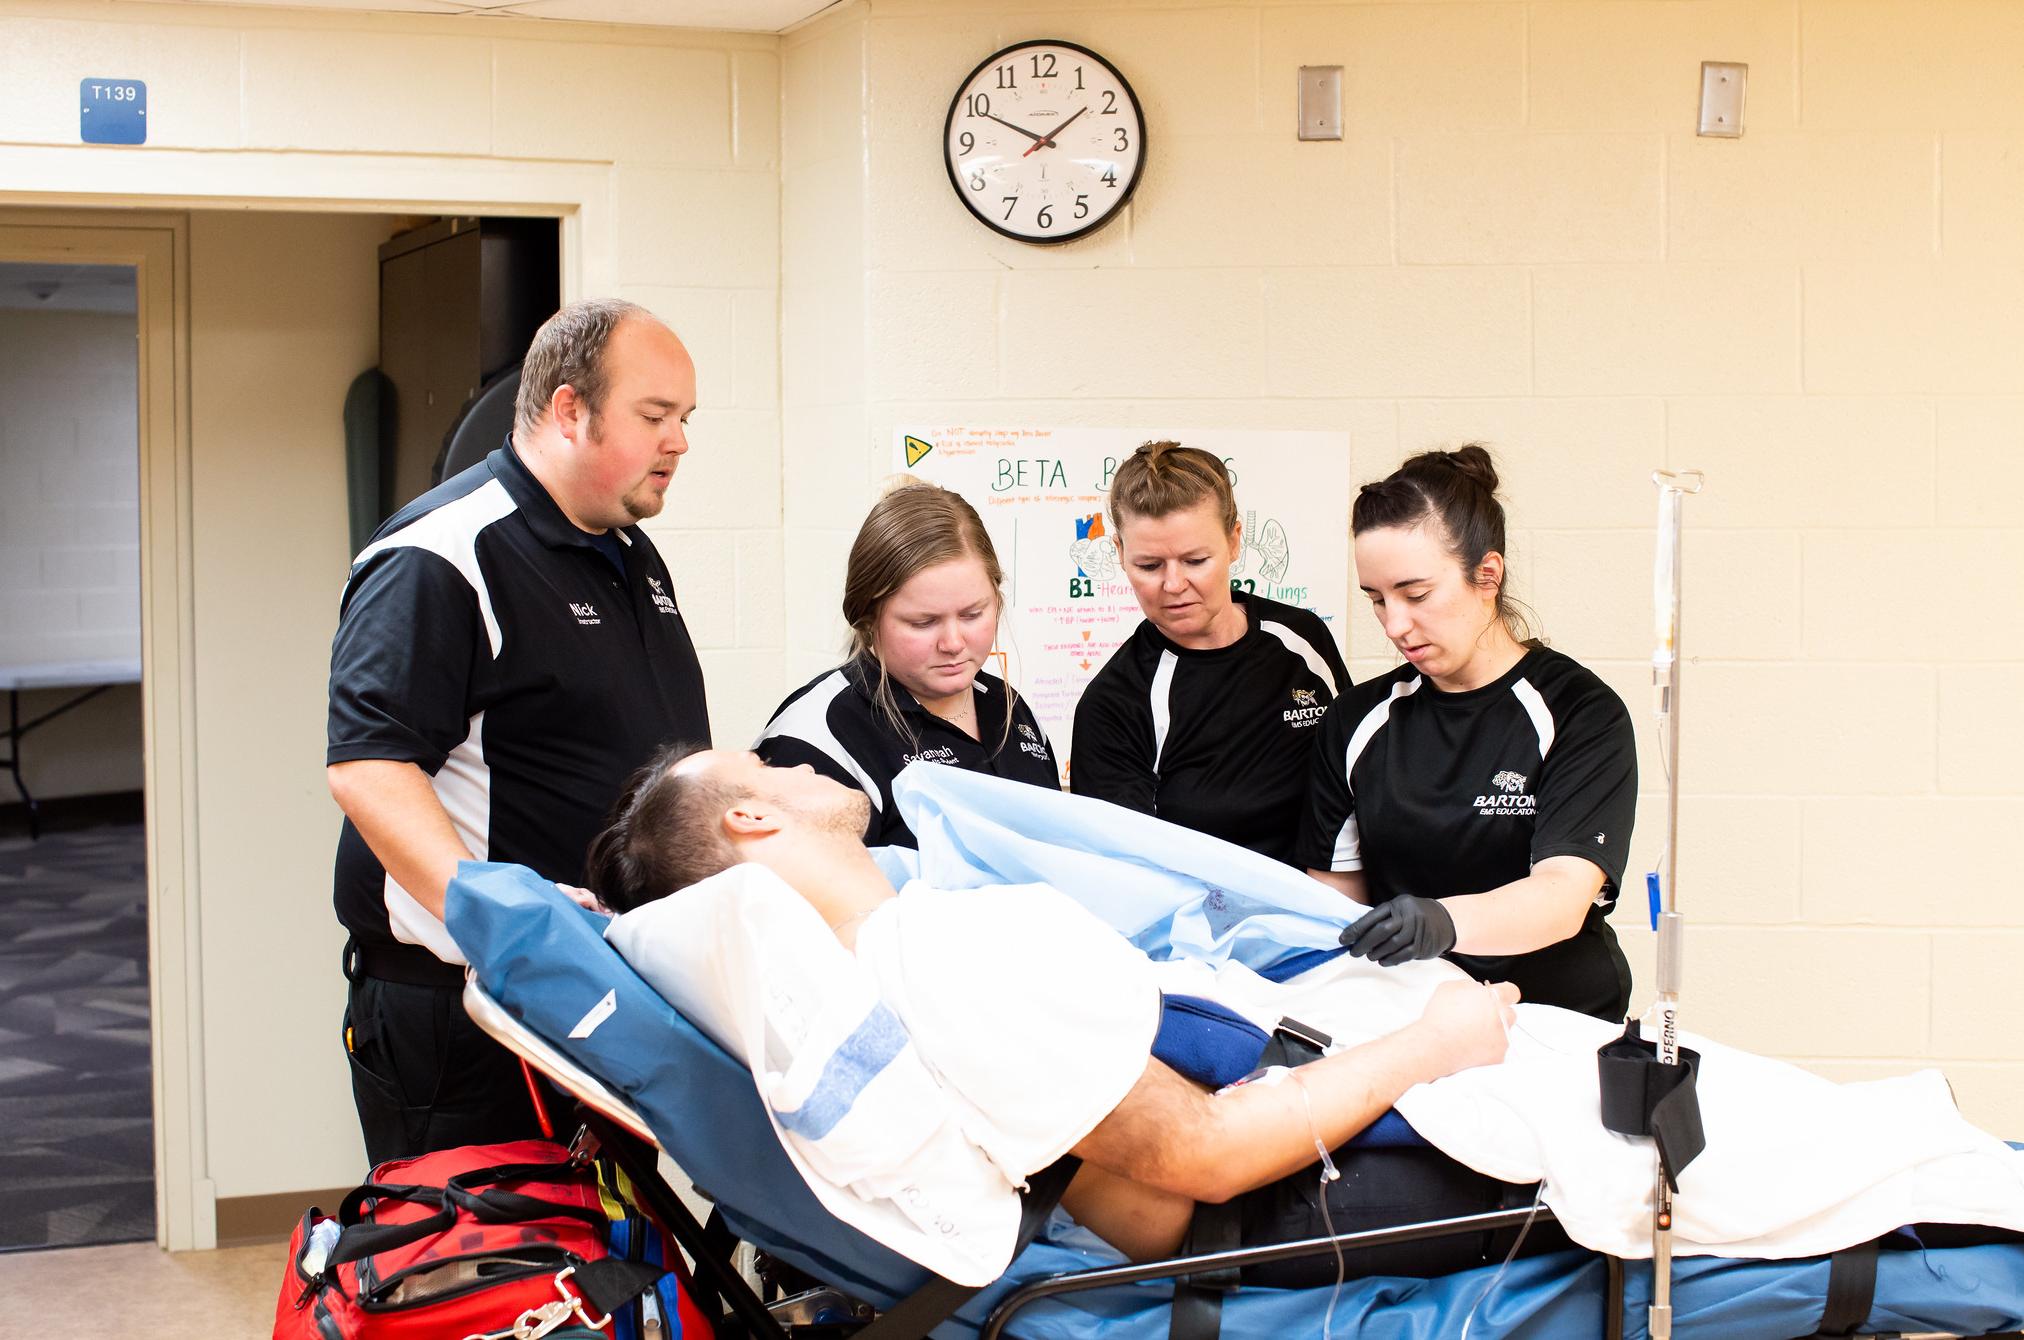 Students and instructor running a paramedic or emt drill with a live patient